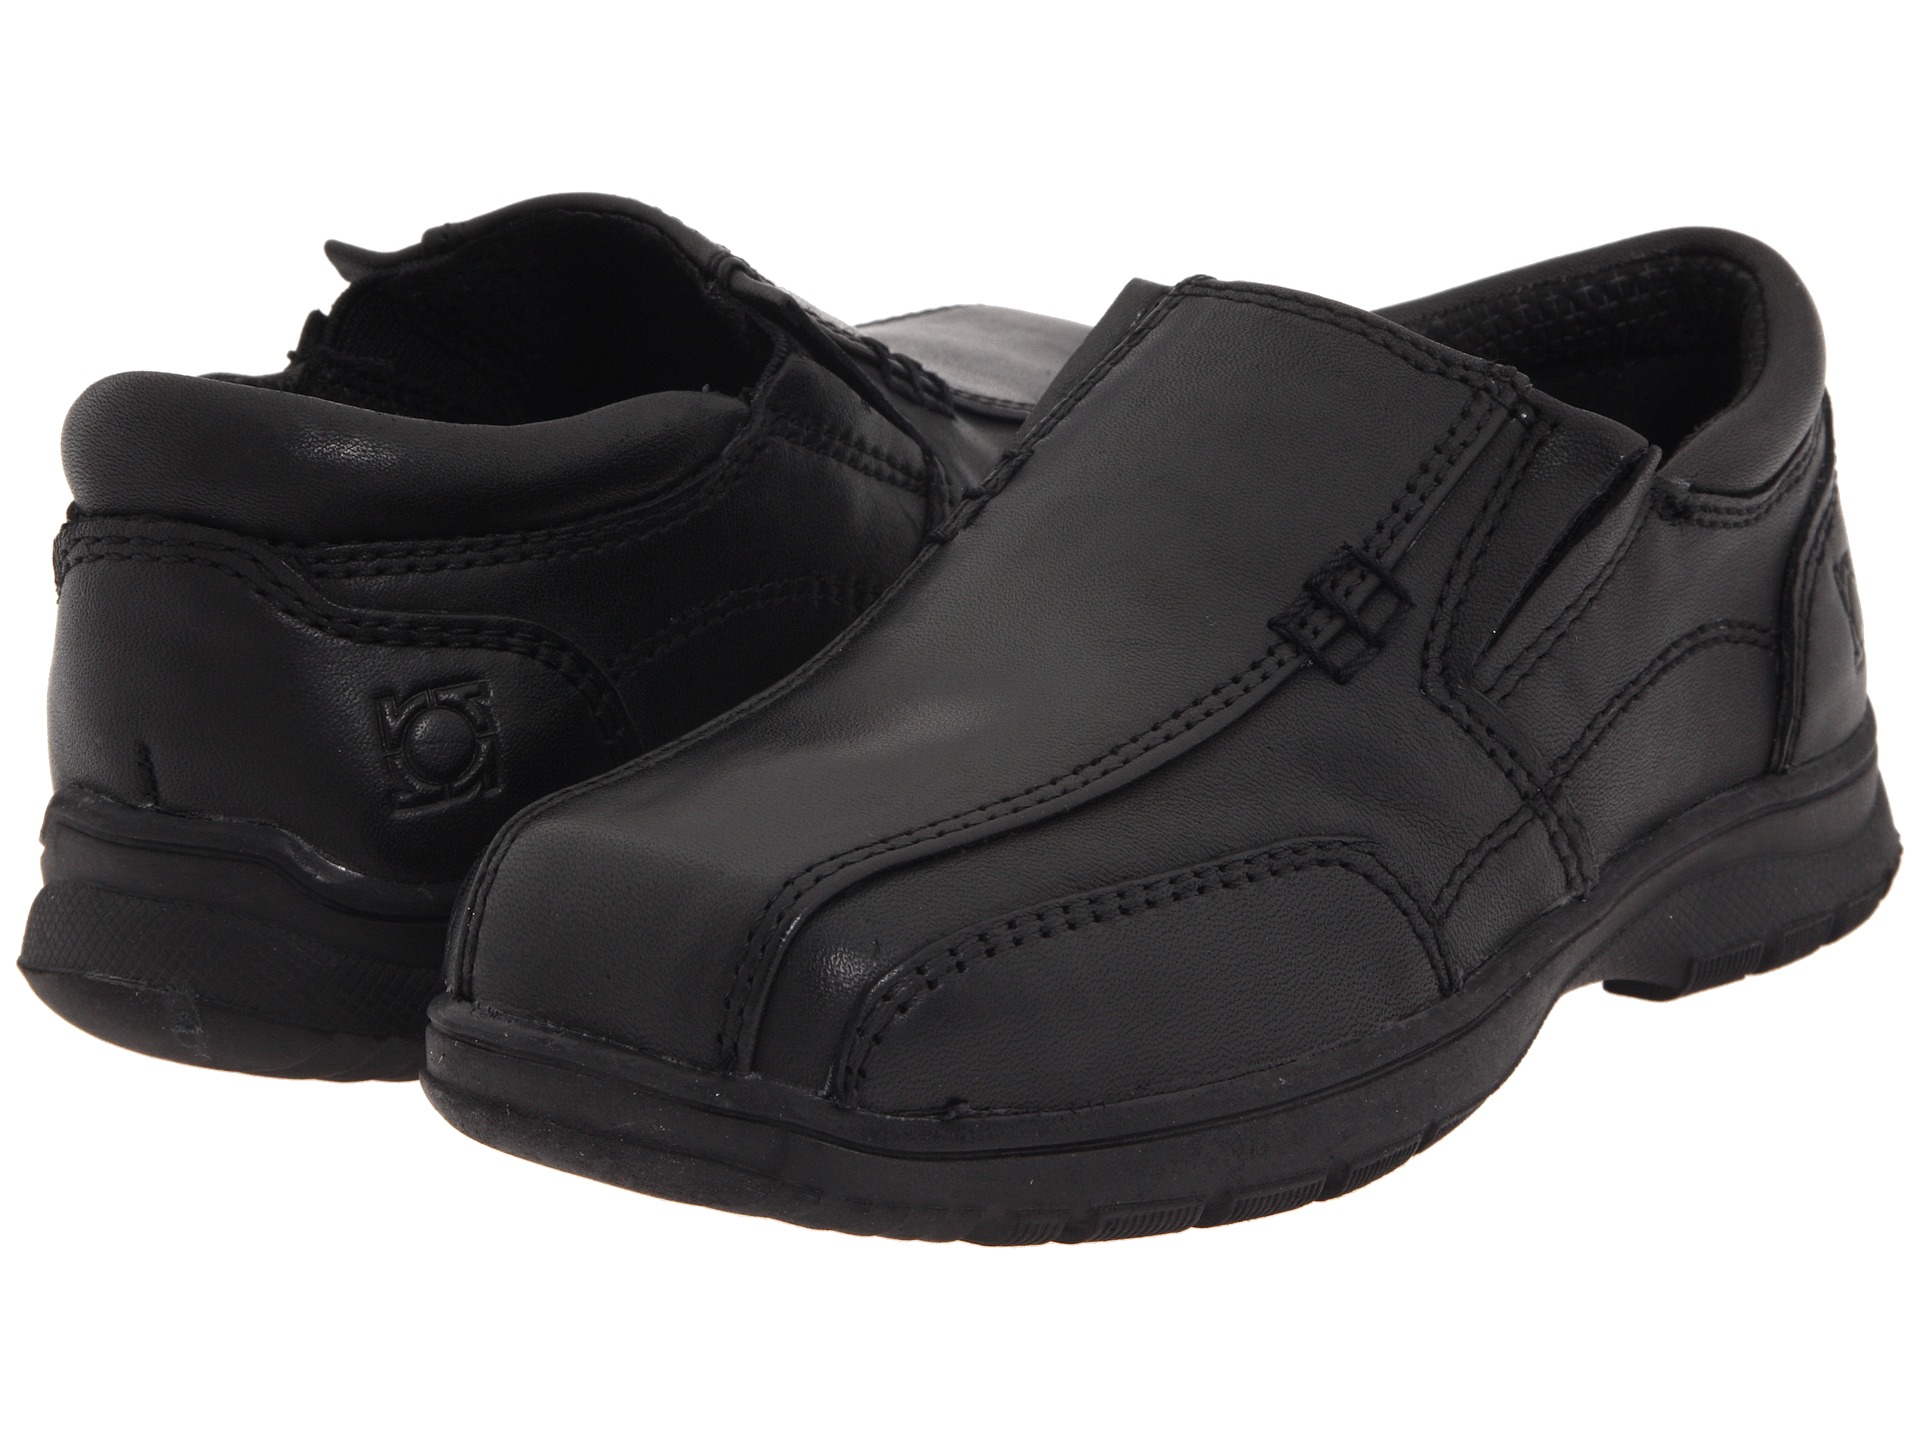 Kenneth Cole Reaction Kids Check N Check 2 (Toddler/Little Kid) Black Leather